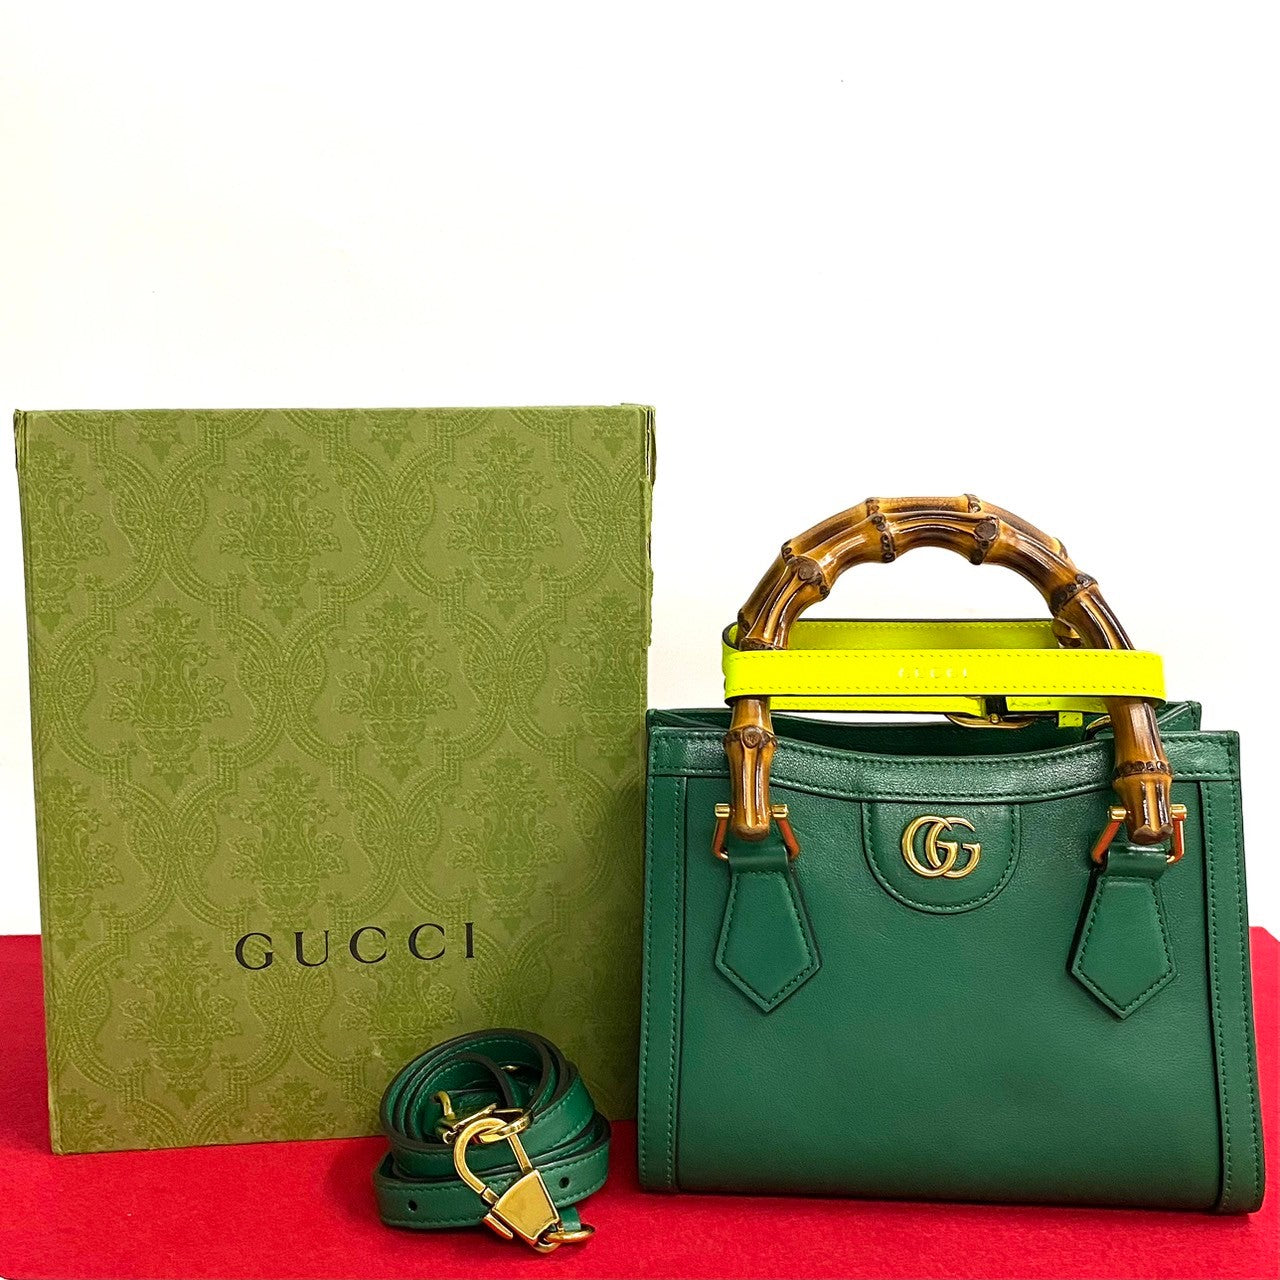 Gucci Bamboo Diana Mini Tote Bag  Leather Handbag in Excellent condition